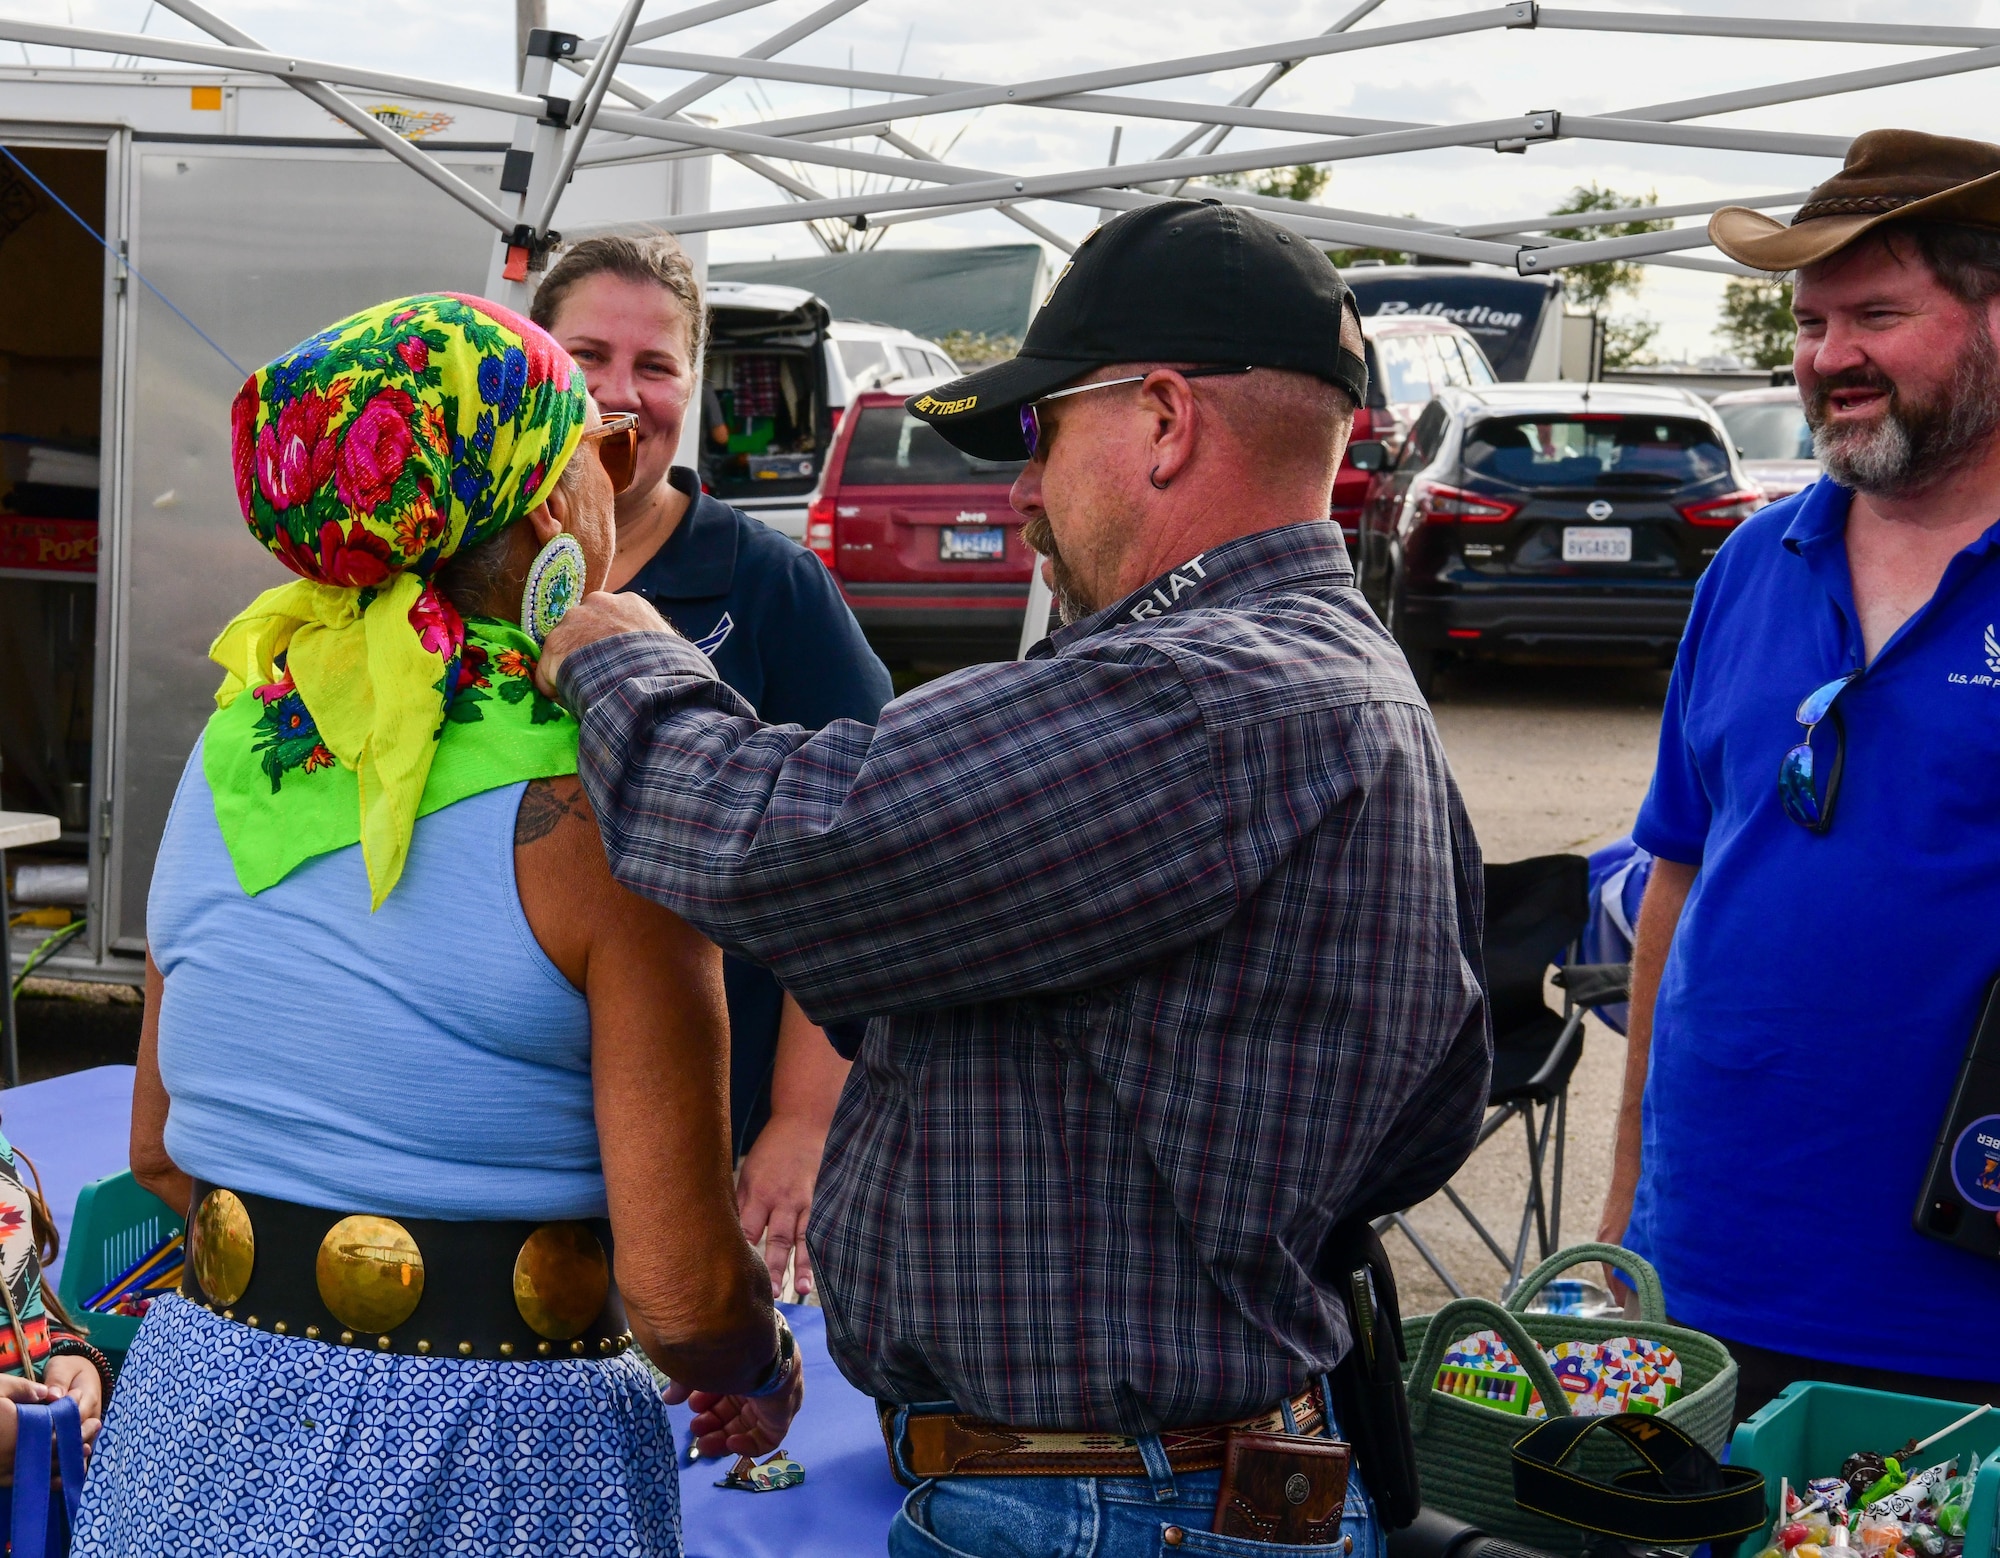 An attendee of the Mandan-Hidatsa-Arikara Nation’s Little Shell Celebration pins an American flag onto a woman’s regalia at the Air Force educational booth in New Town, N.D., Aug. 11, 2023. This outreach opportunity built relationships between the Air Force and local tribal. (U.S. Air Force photo by Abigail Kinder)